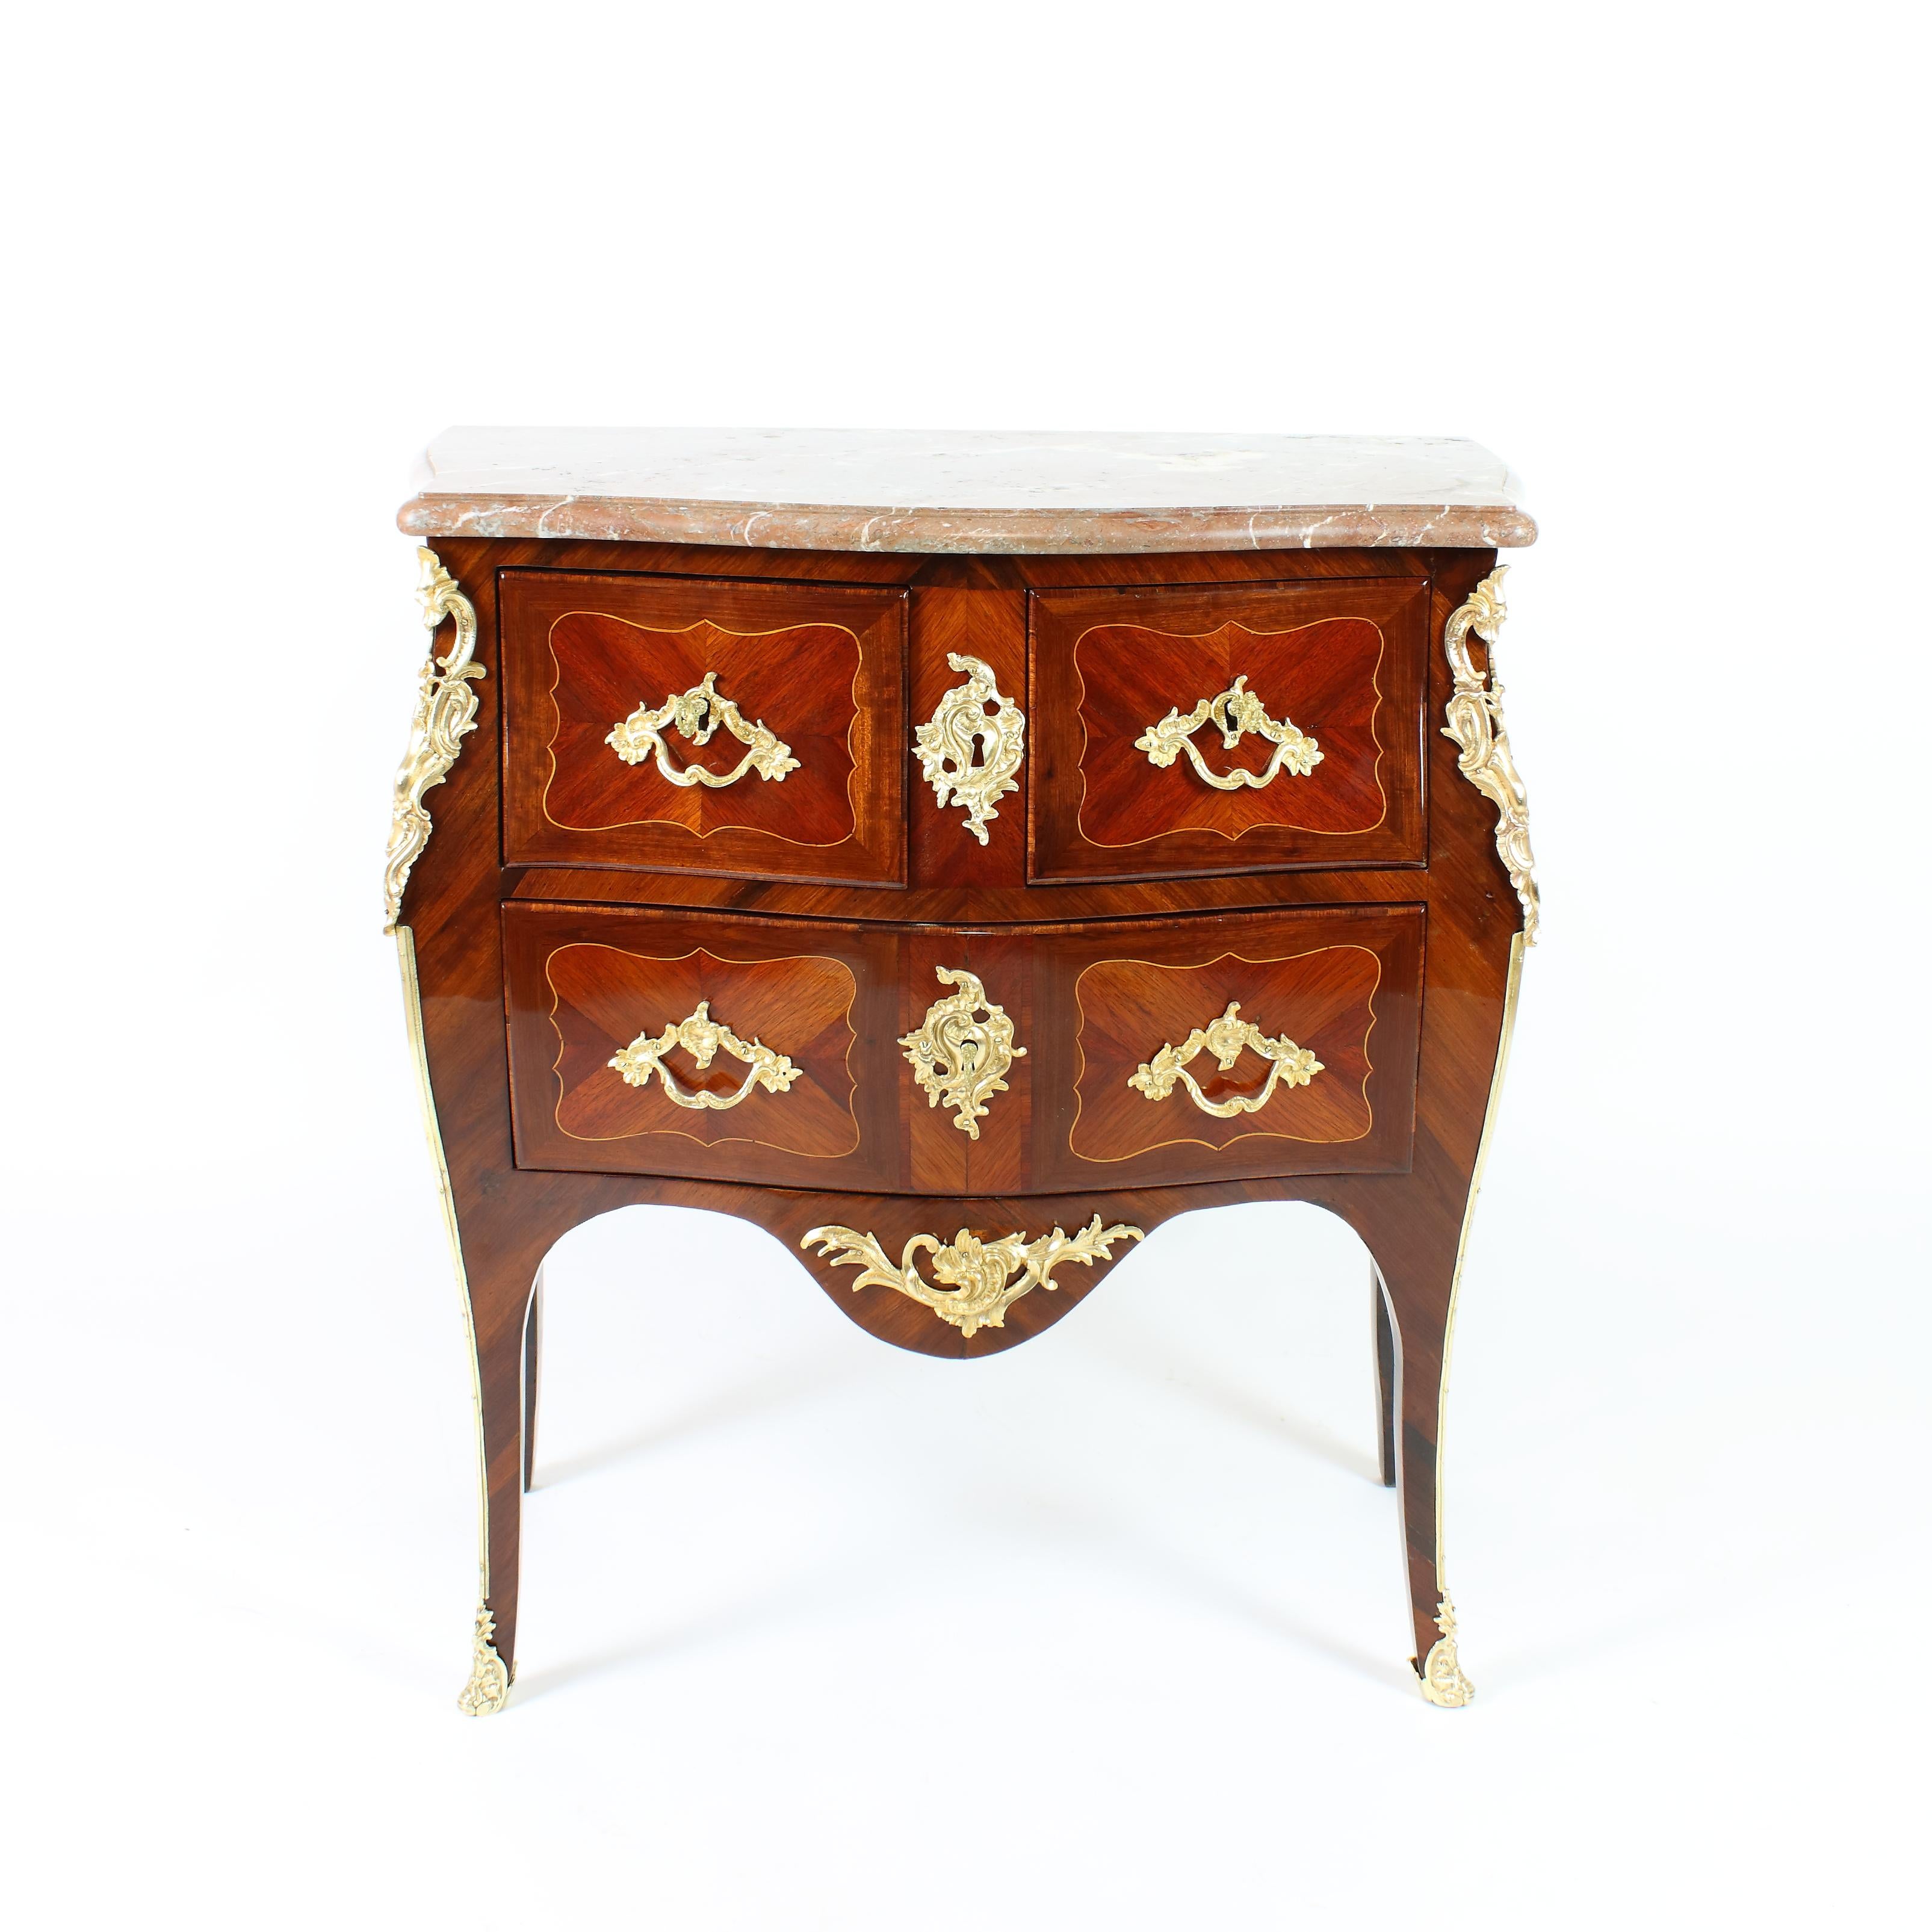 French 18th Century Small Louis XV Marquetry Bombé Shaped Commode or Sauteuse